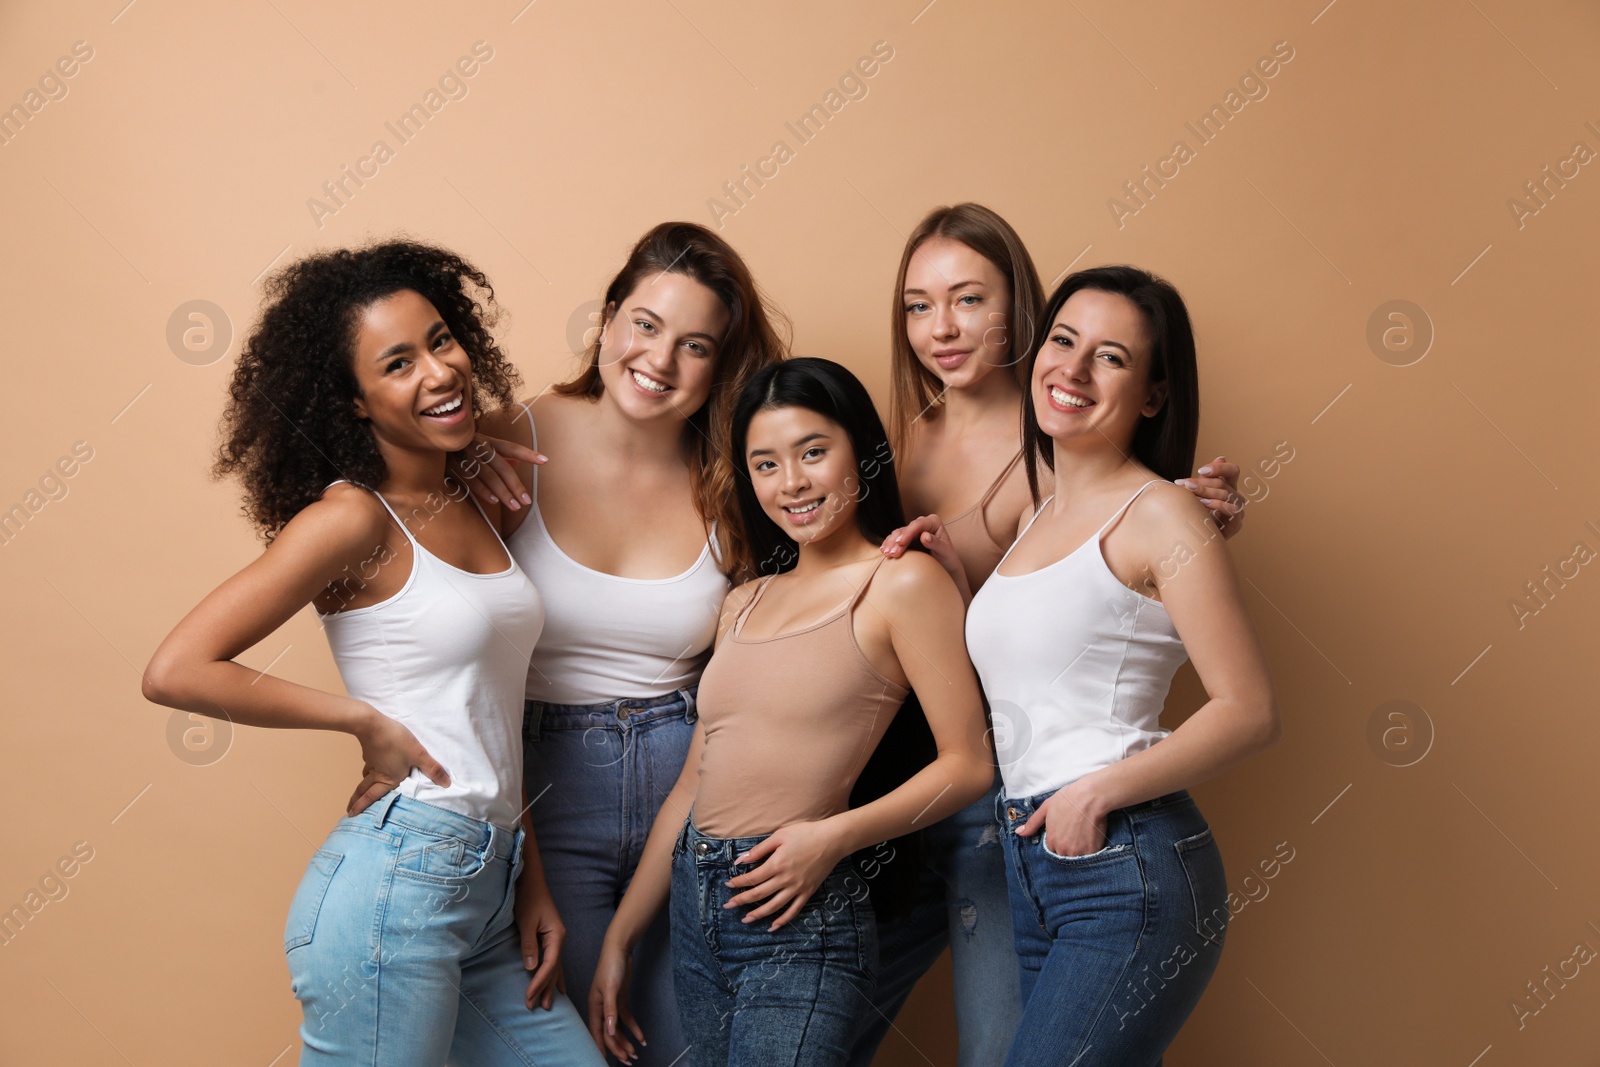 Photo of Group of women with different body types on beige background